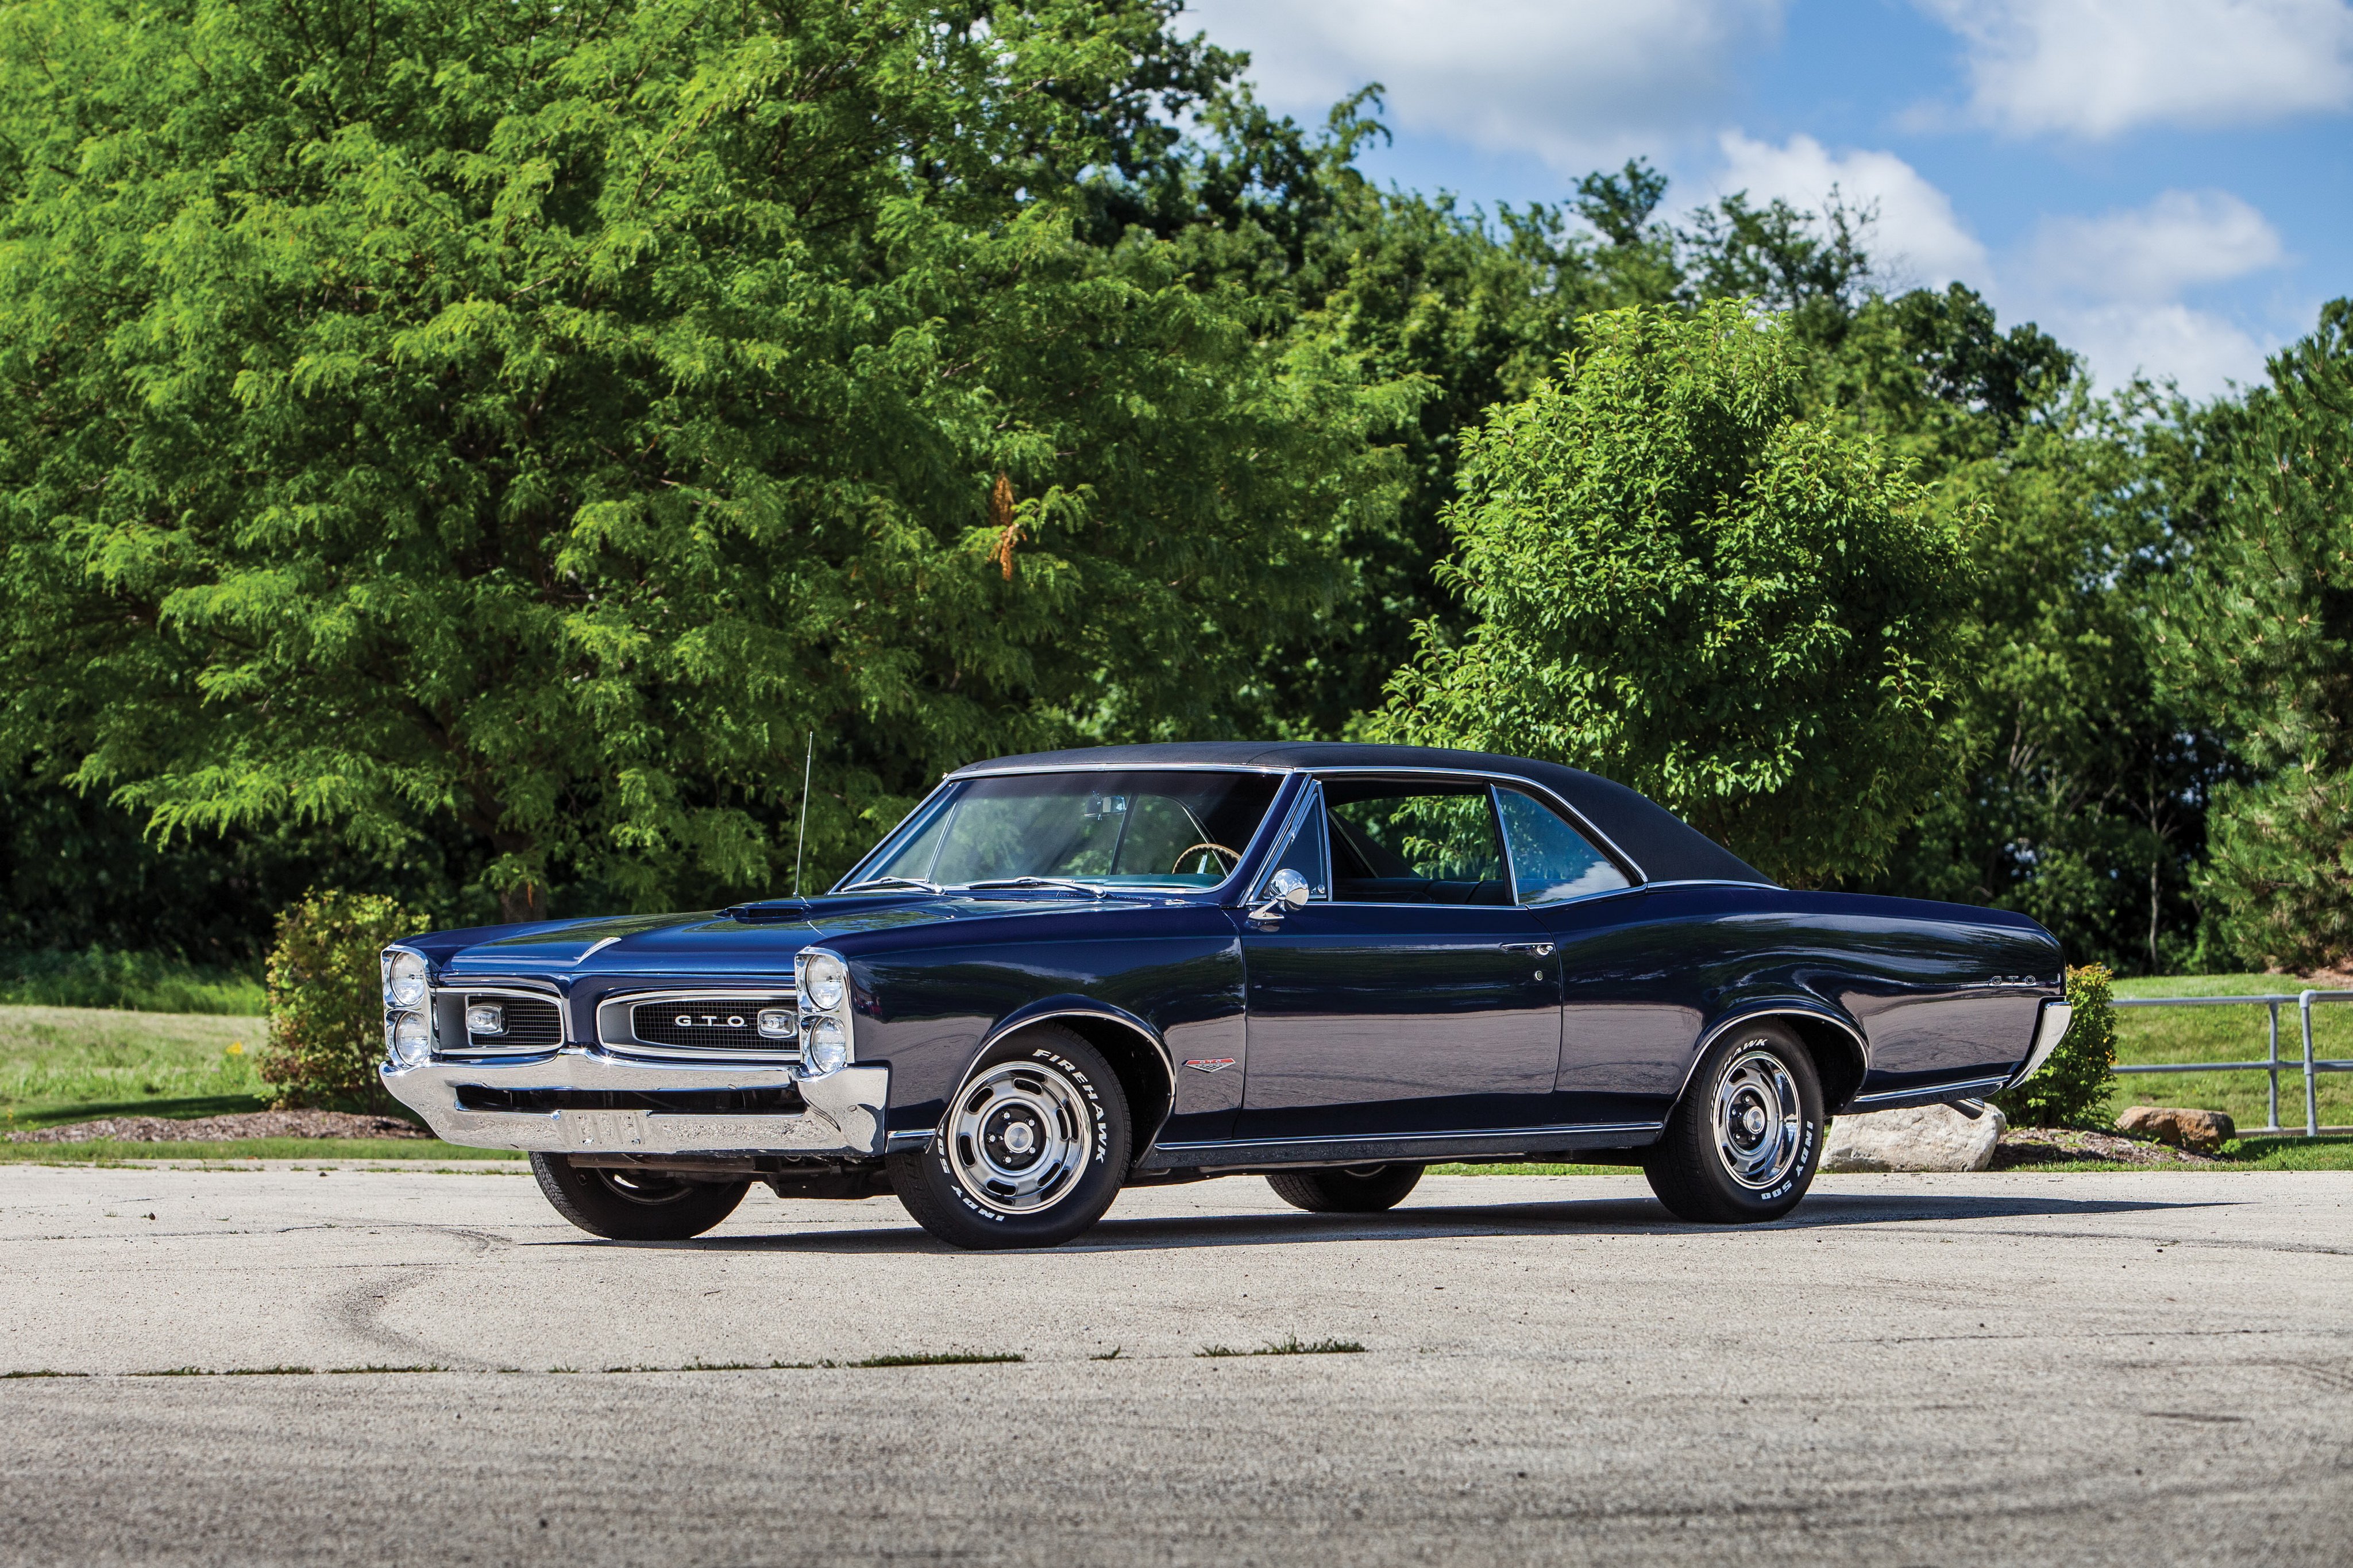 1966, Pontiac, Tempest, Gto, Hardtop, Coupe, Muscle, Classic Wallpaper